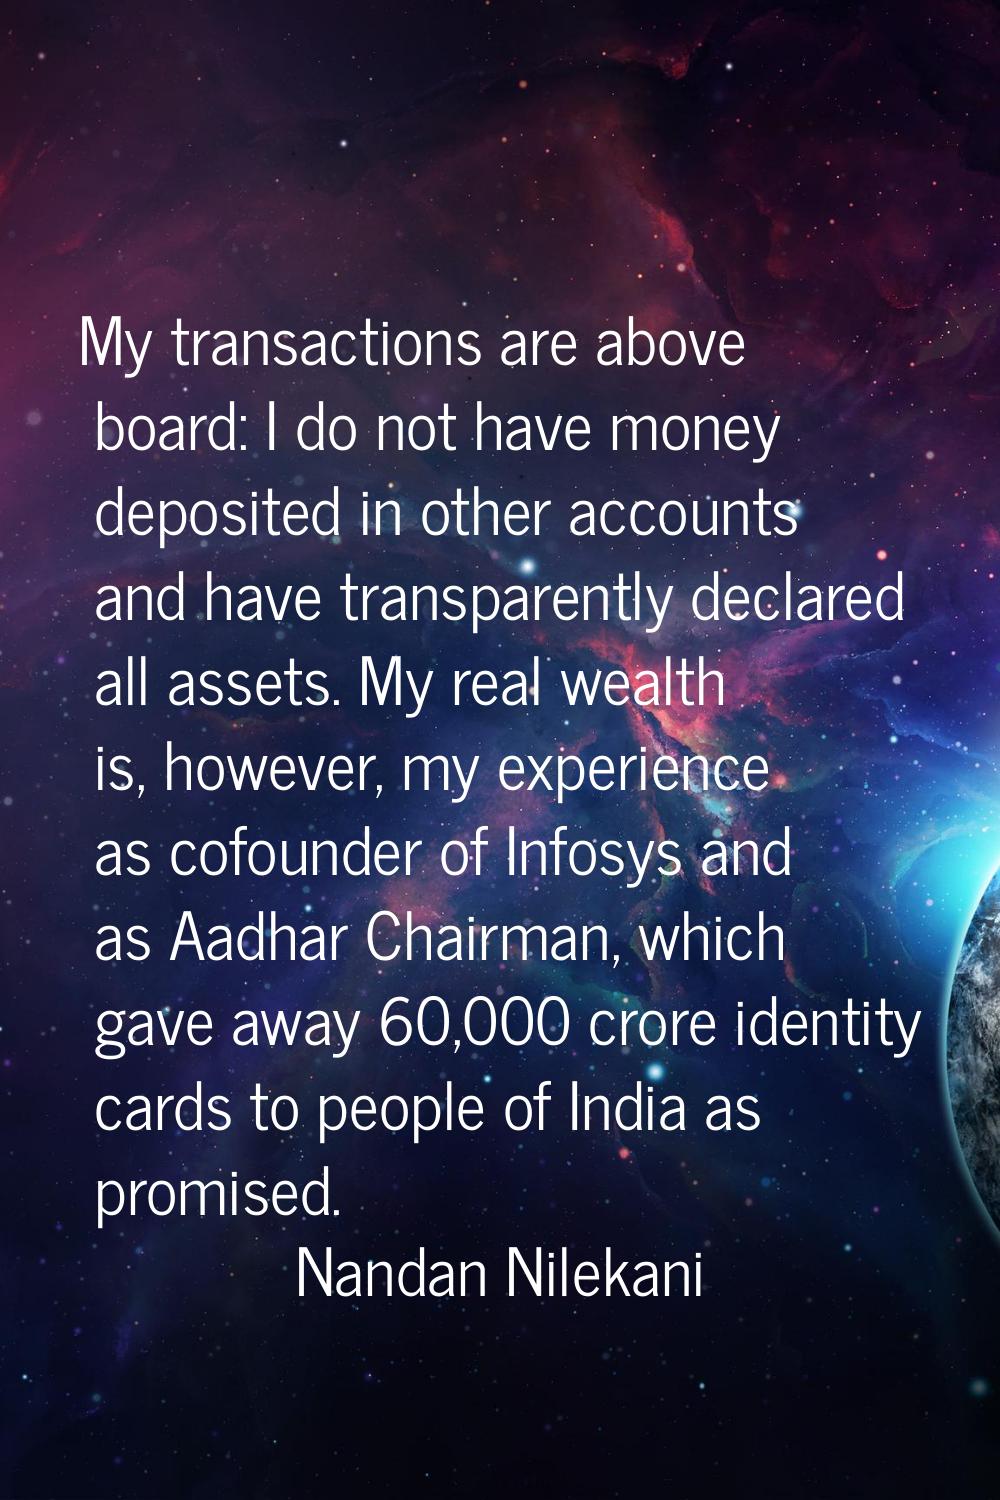 My transactions are above board: I do not have money deposited in other accounts and have transpare